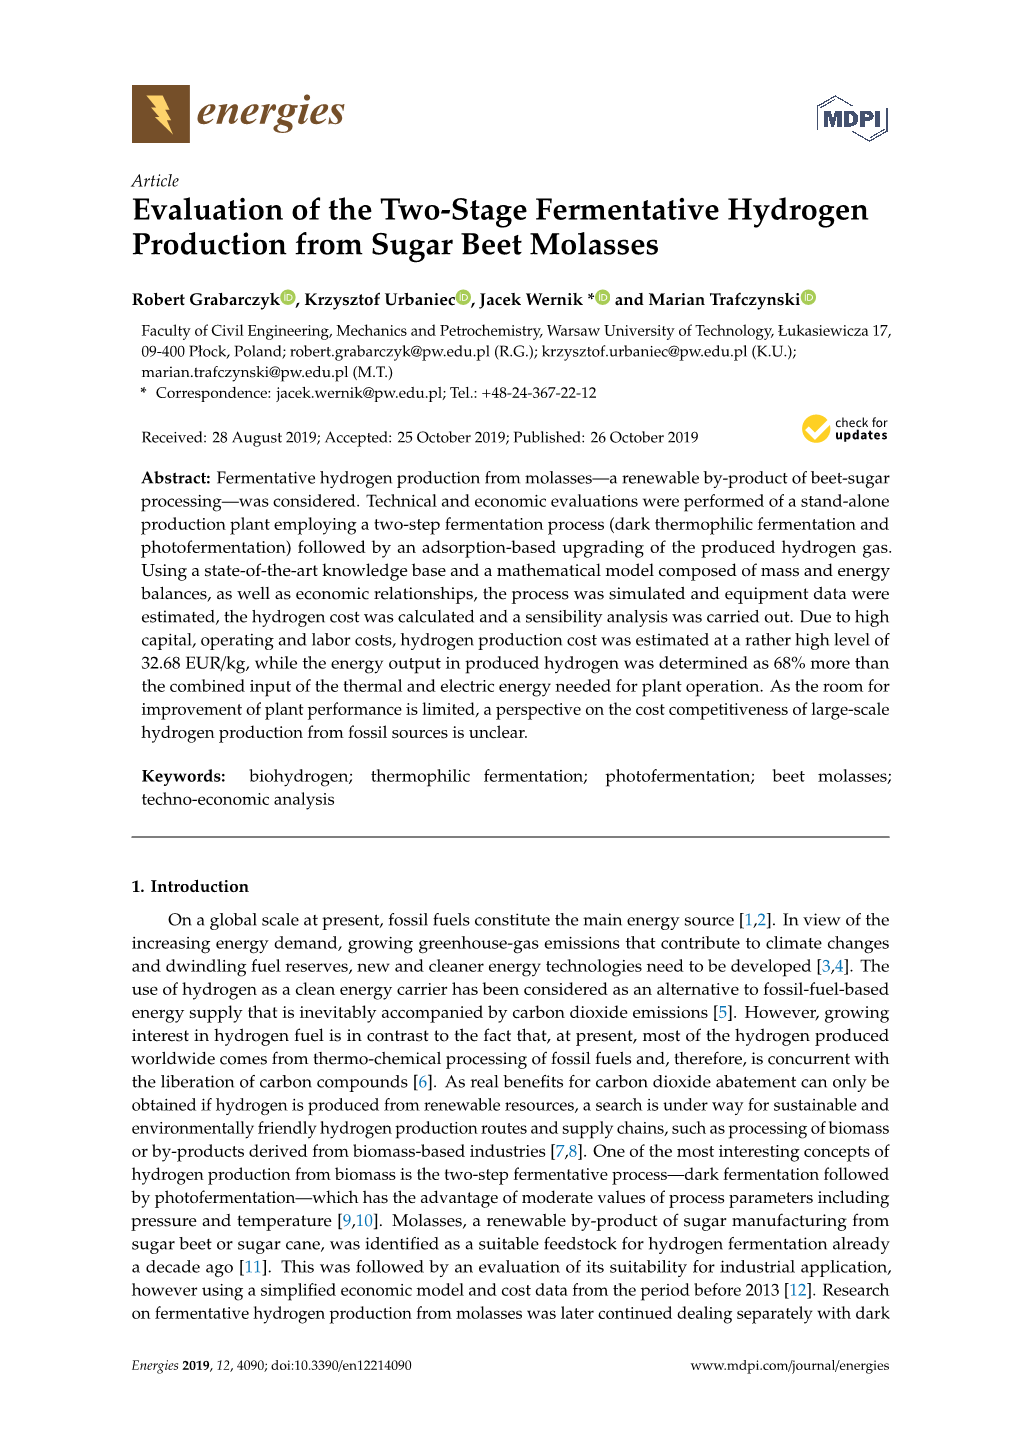 Evaluation of the Two-Stage Fermentative Hydrogen Production from Sugar Beet Molasses